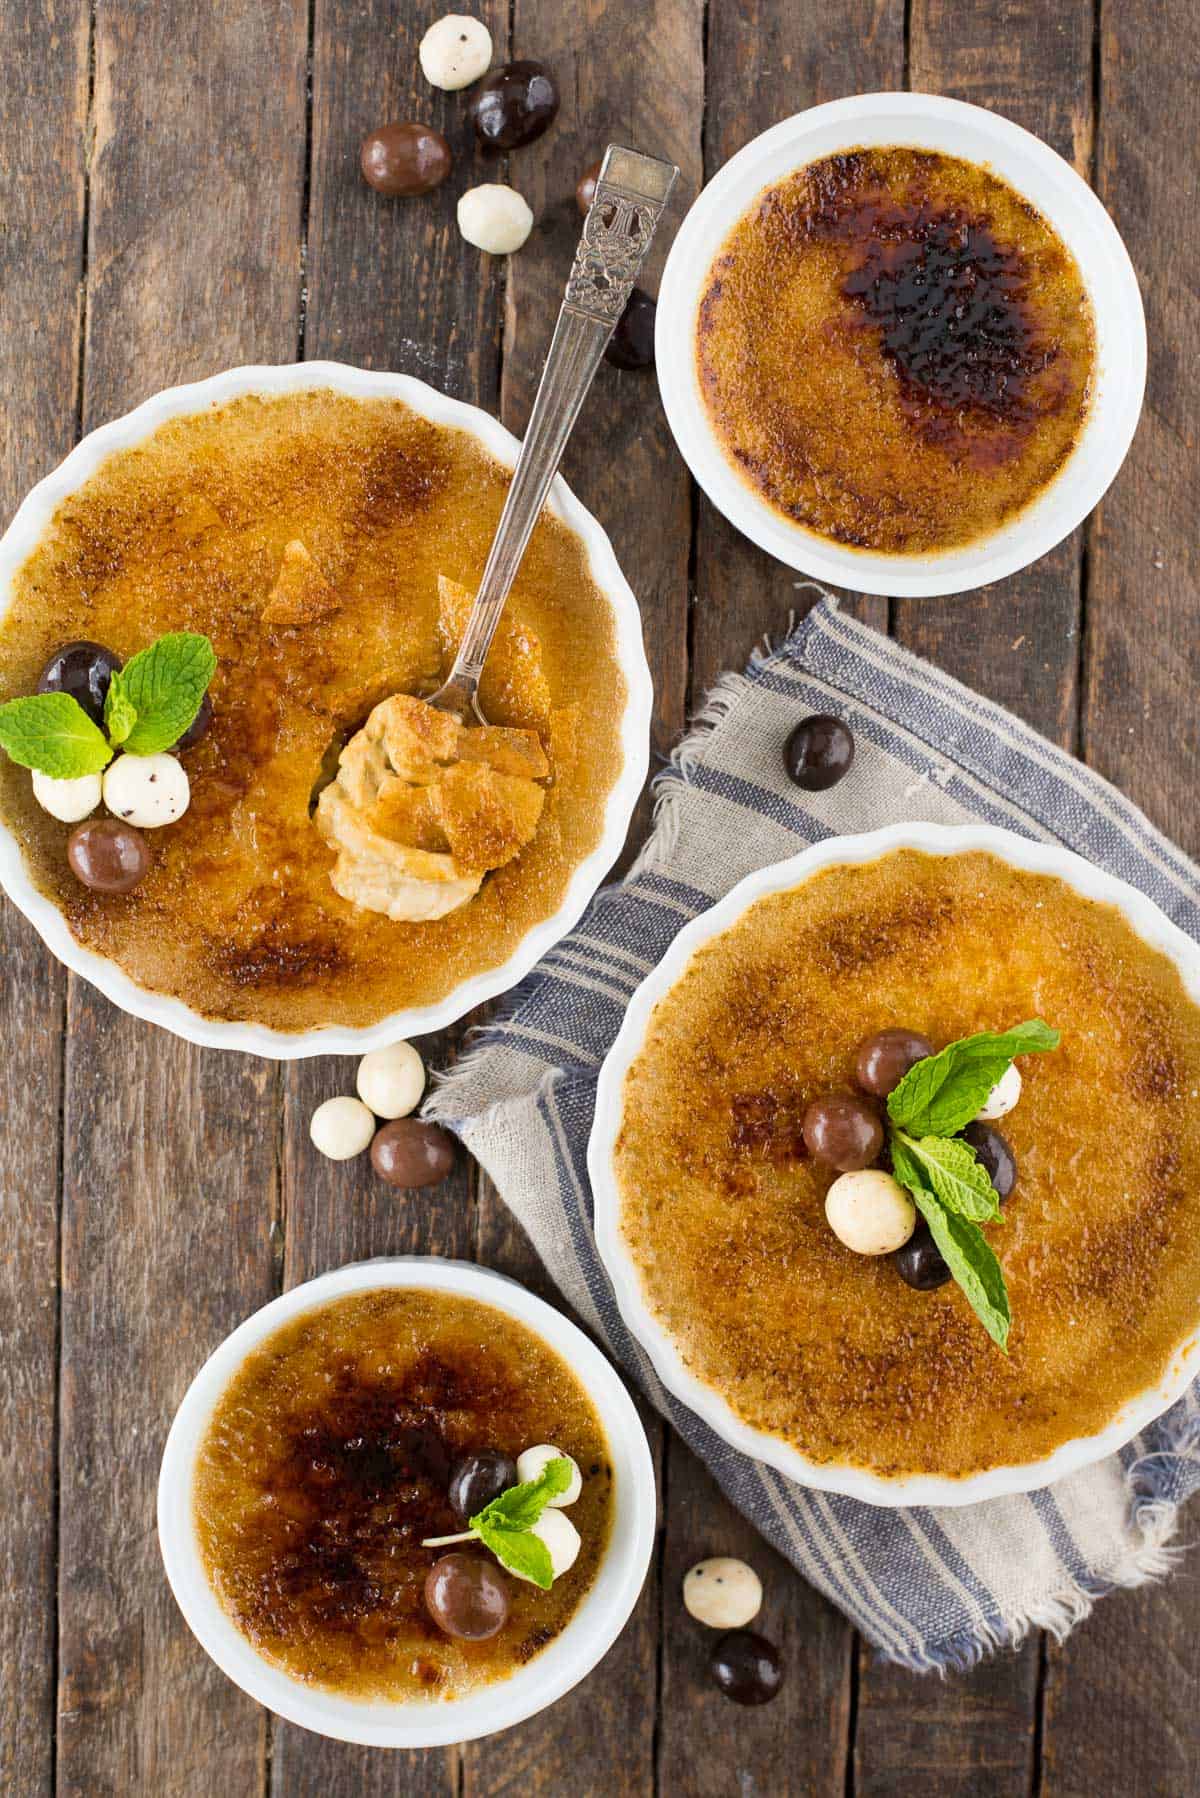 espresso creme brûlée in white round ramekin with chocolate covered coffee beans and mint leaf on top of creme brûlée